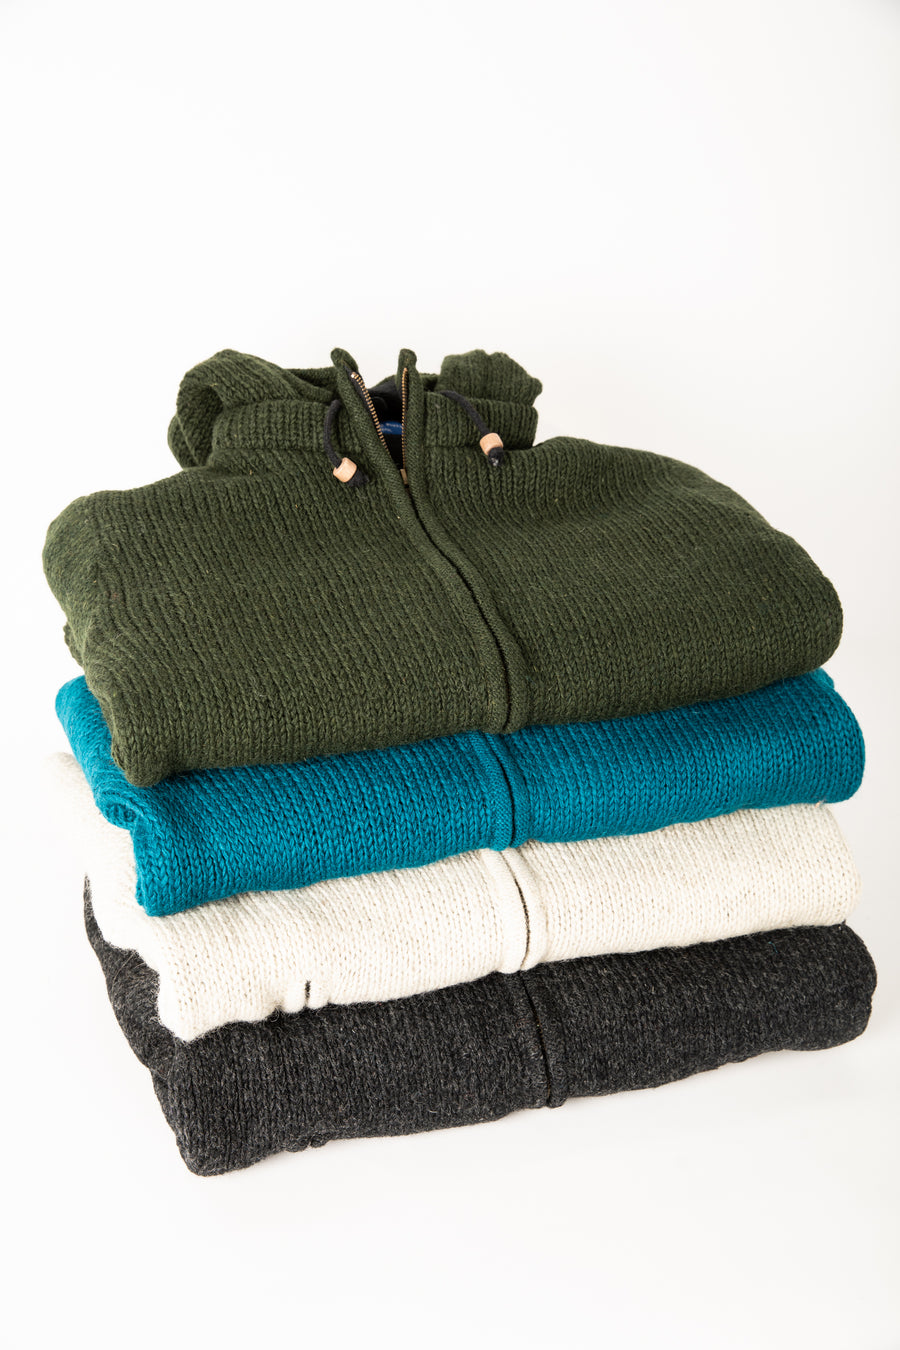 stack of wool hooded jackets to show off the different color possibilities